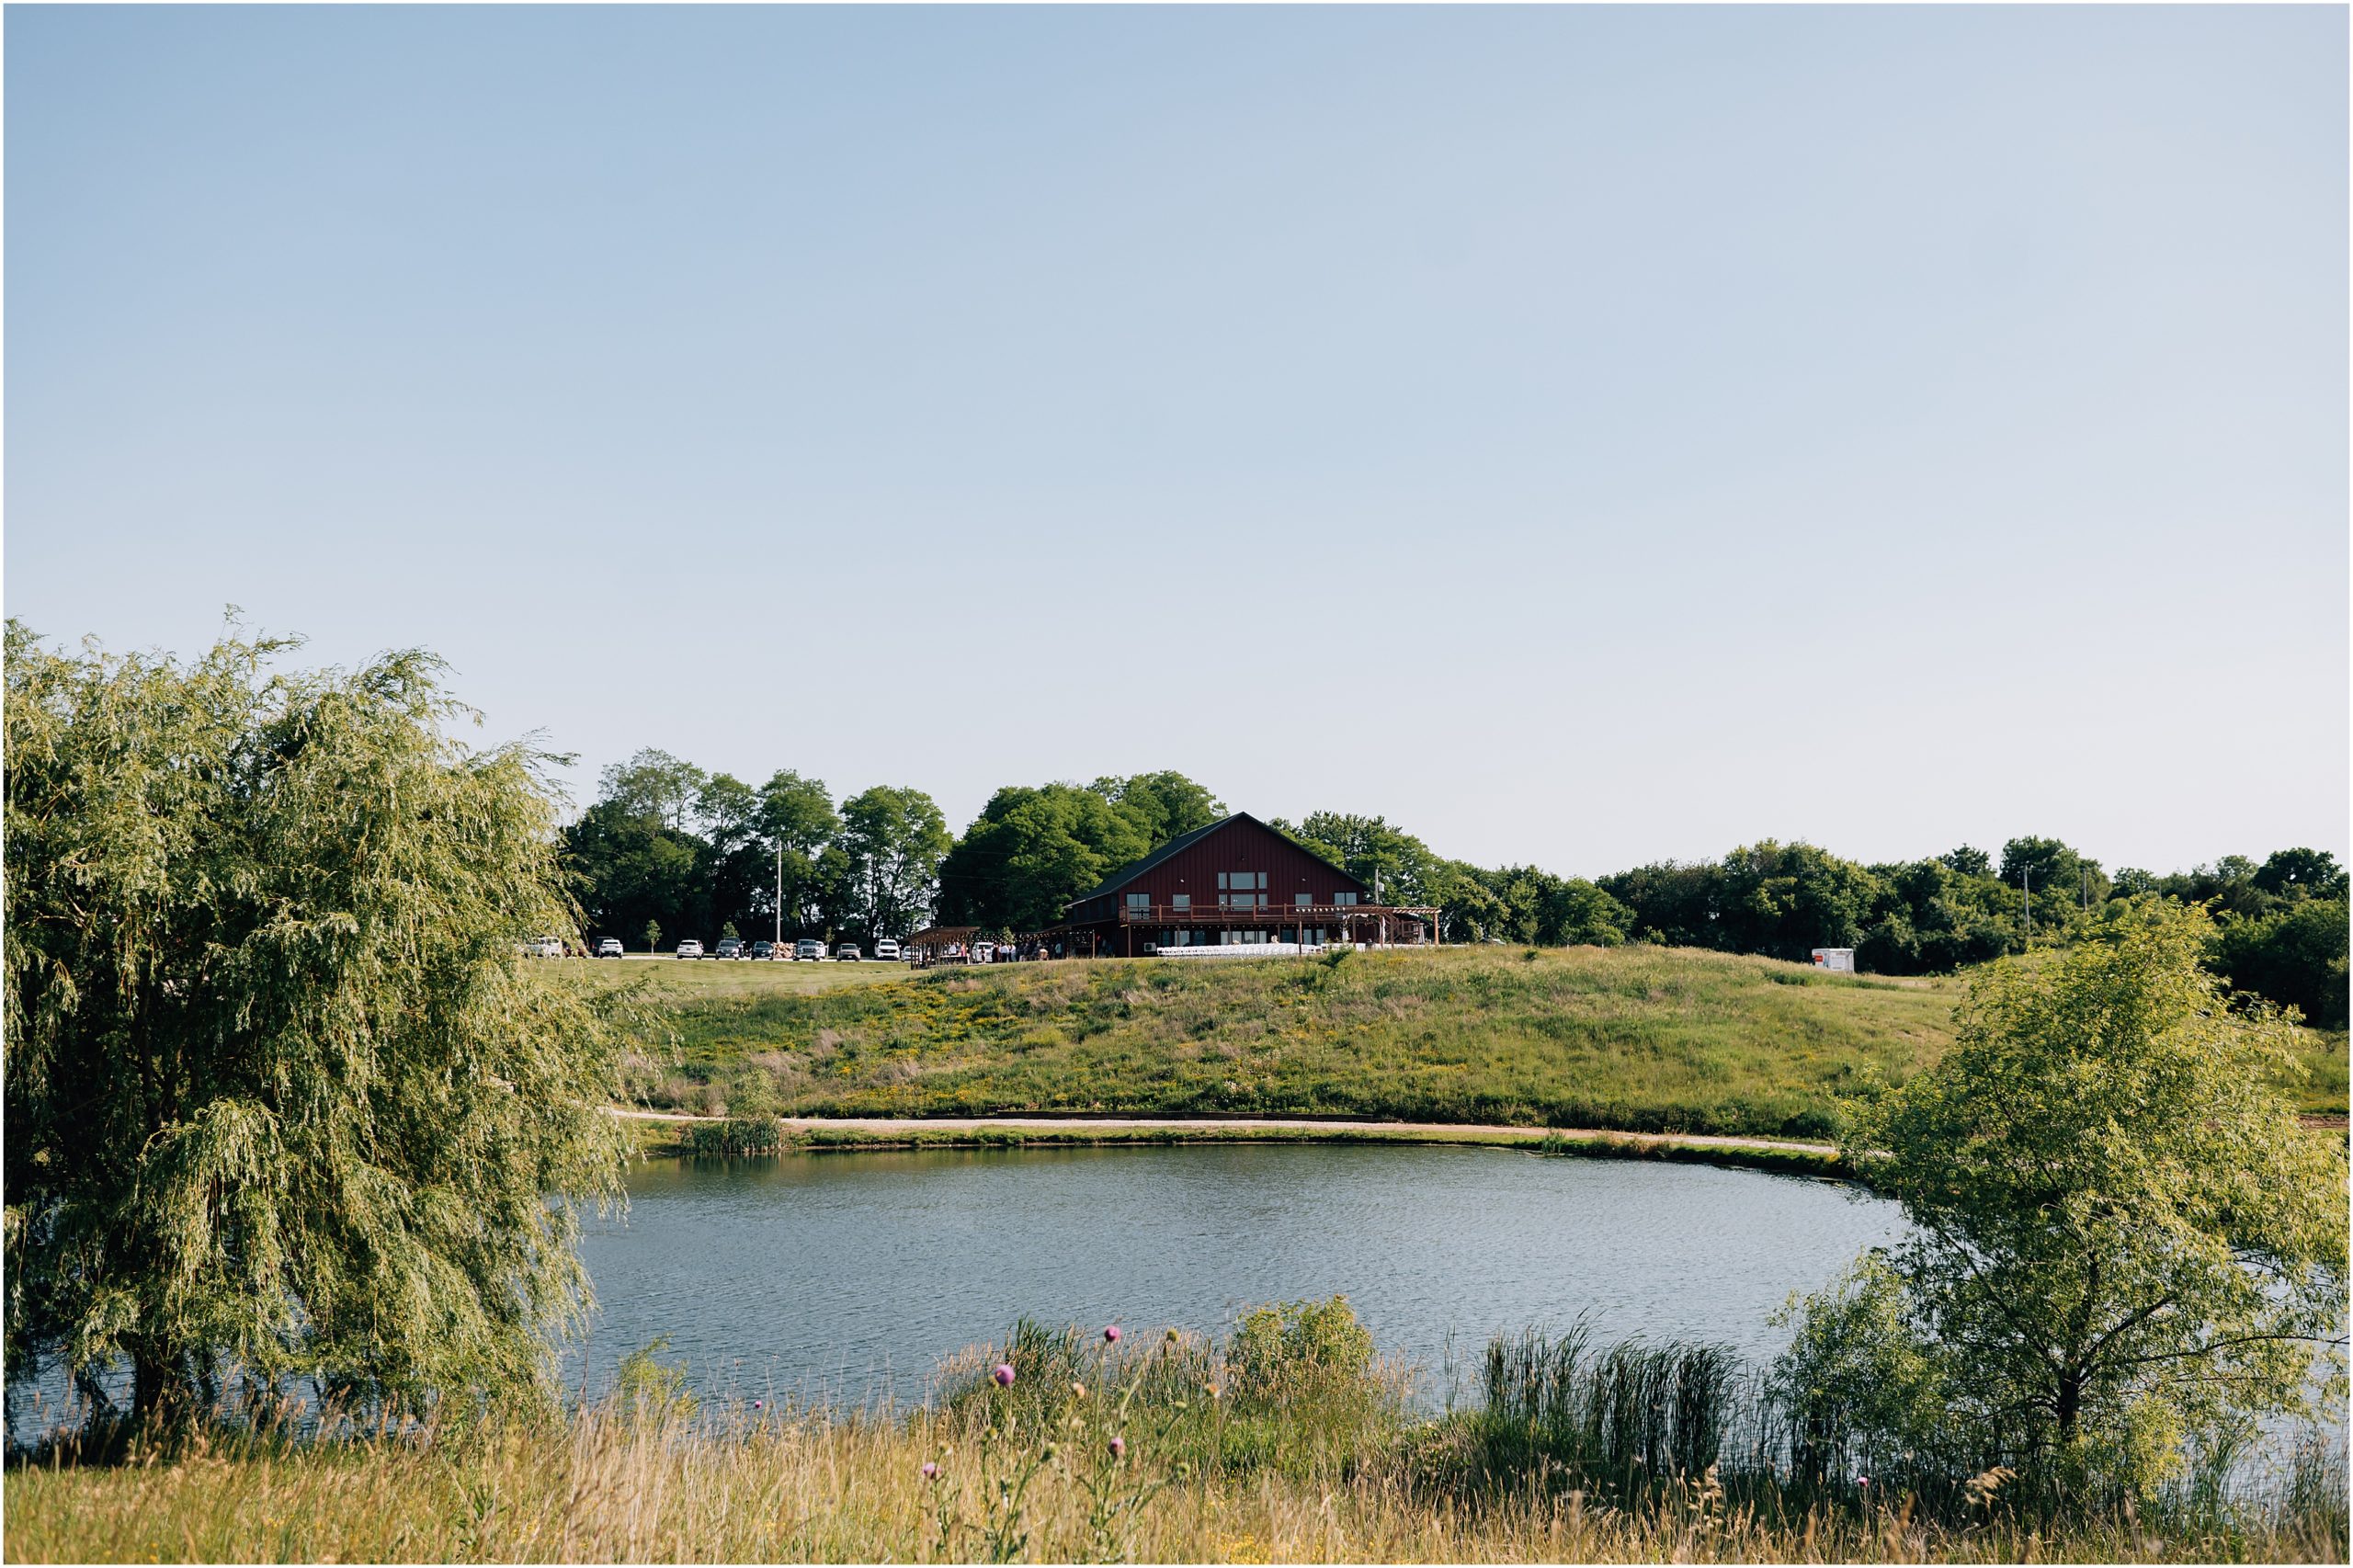 A photo of a Des Moines wedding venue, Carper Vineyard and Winery, from across the lake. The red barn is surrounded by trees and a field. Photo of the wedding venue in des moines taken by Anna Brace Photography, an Omaha Wedding Photographer. 